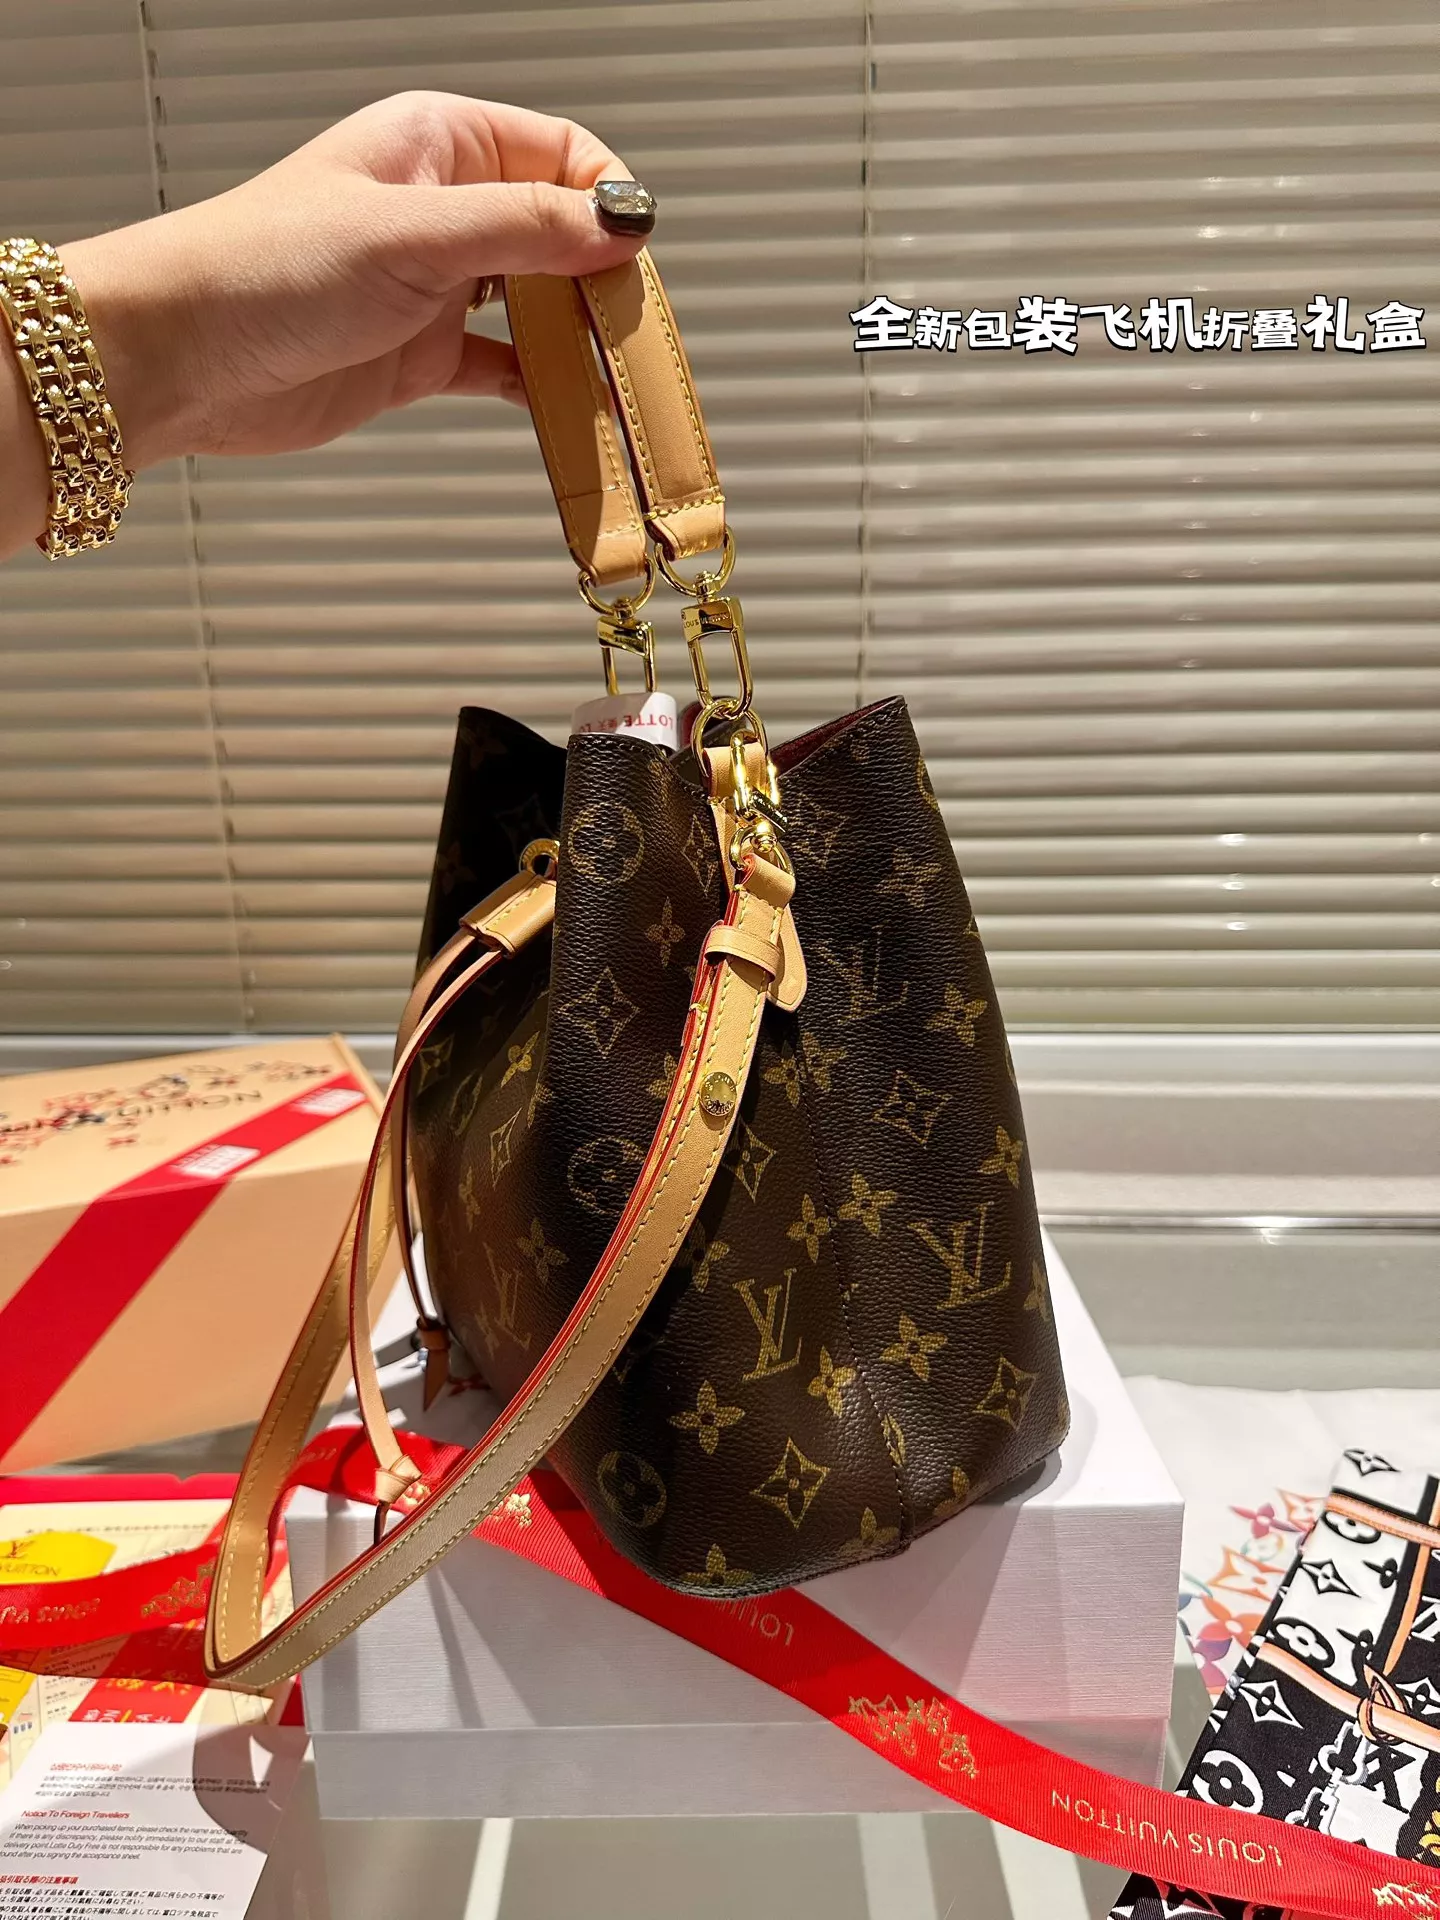 Louis Vuitton bags, Gallery posted by IG.abcx131419